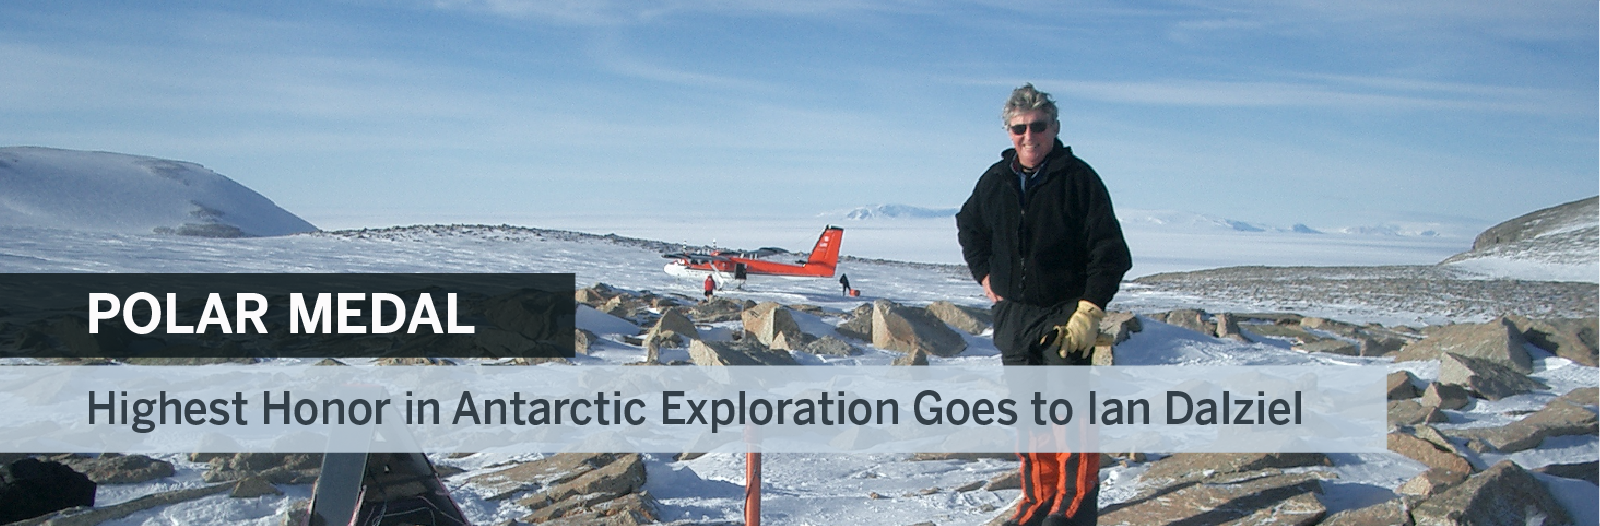 Highest Honor in Antarctic Exploration Goes to Ian Dalziel – banner